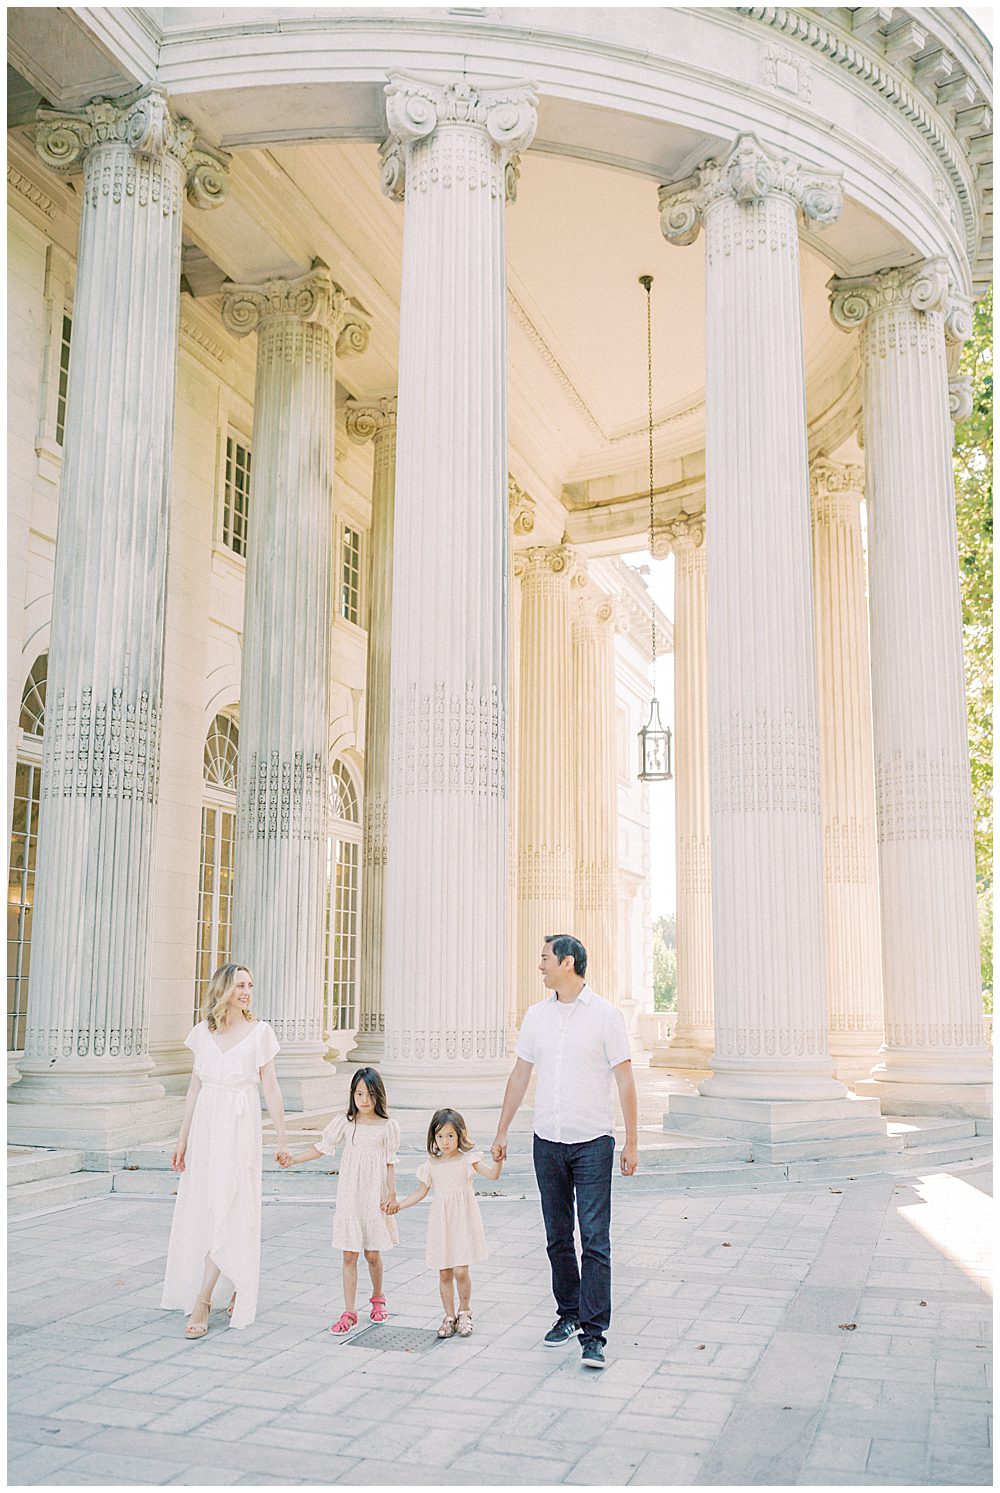 Family walks together in front of columns at DAR Constitution Hall.